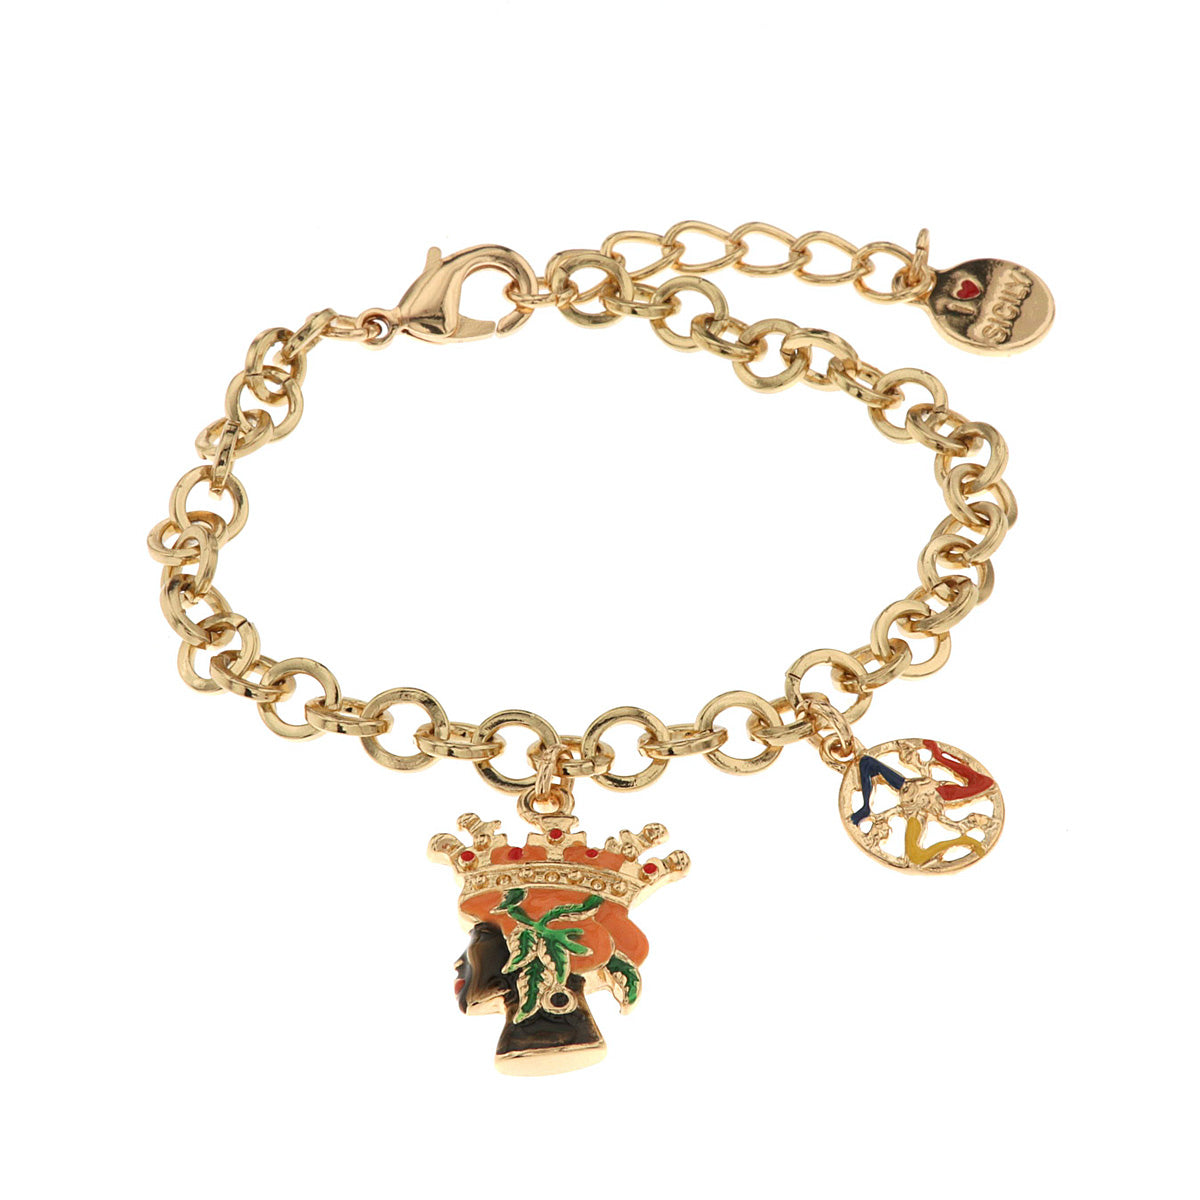 Metal bracelet with a woman's head and Trinacria symbol embellished with colored glazes